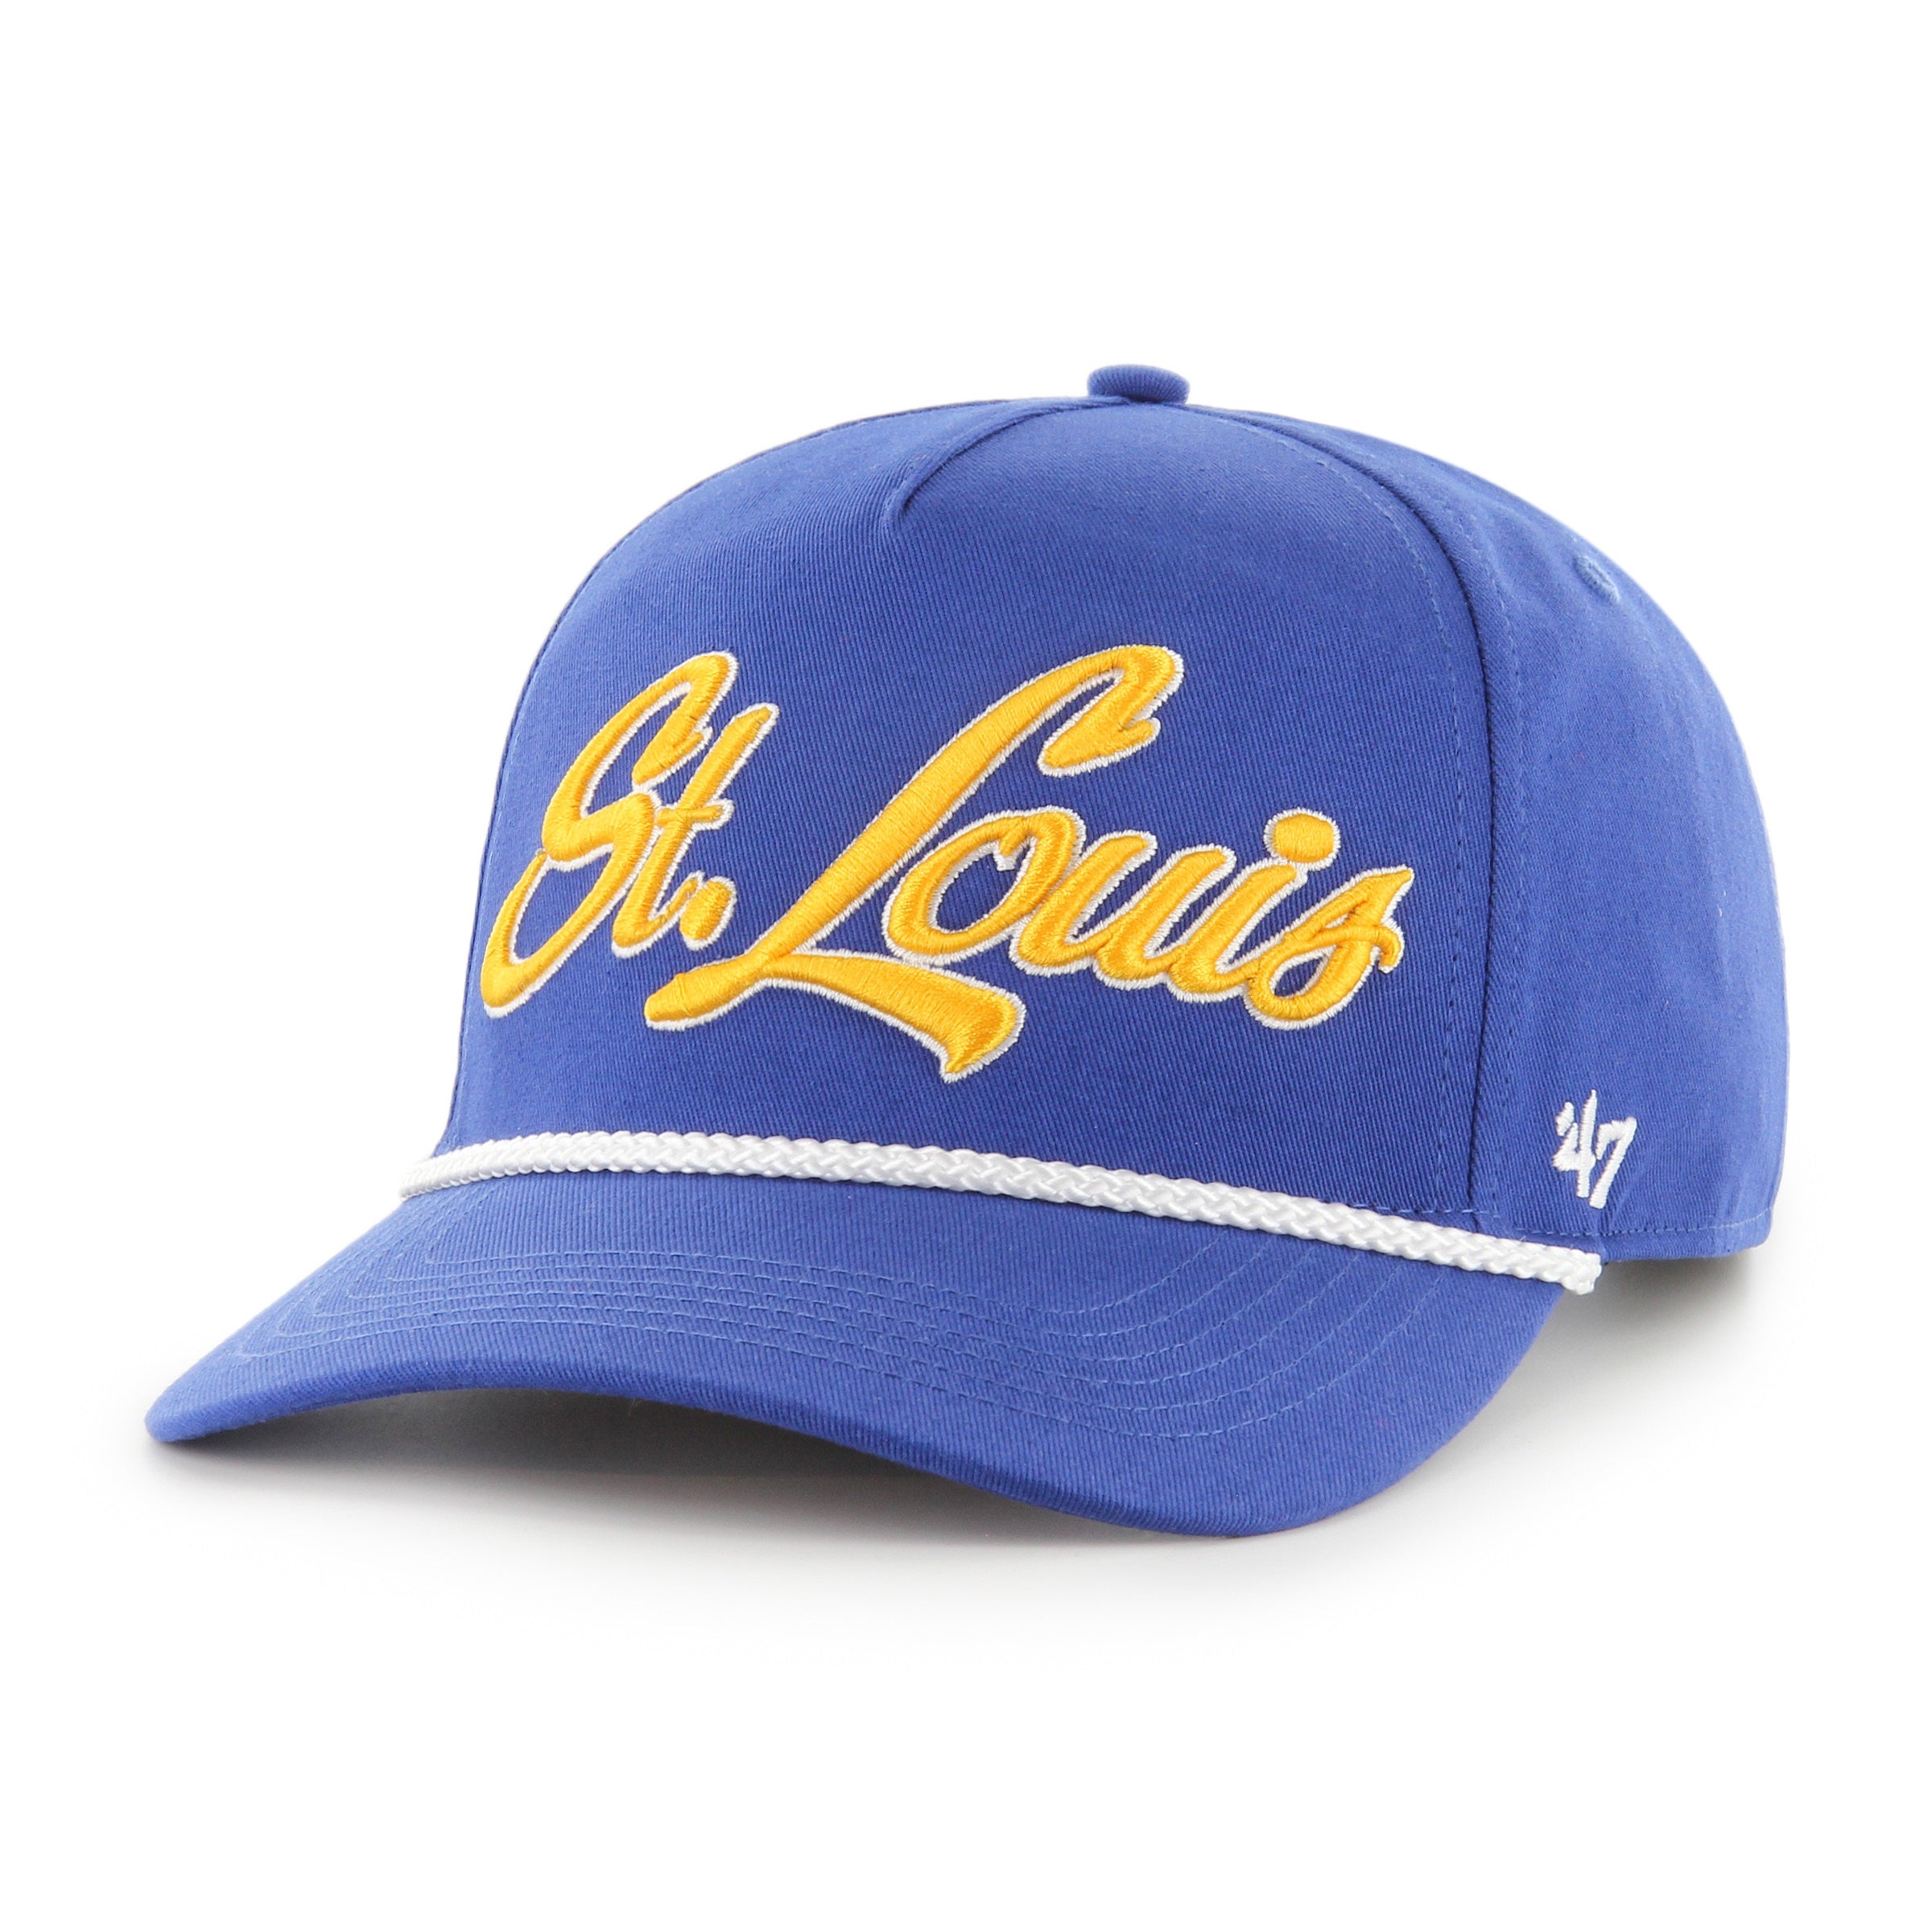 Blinged Royal Blue St Louis Blues With Mini Note Hat Hand 